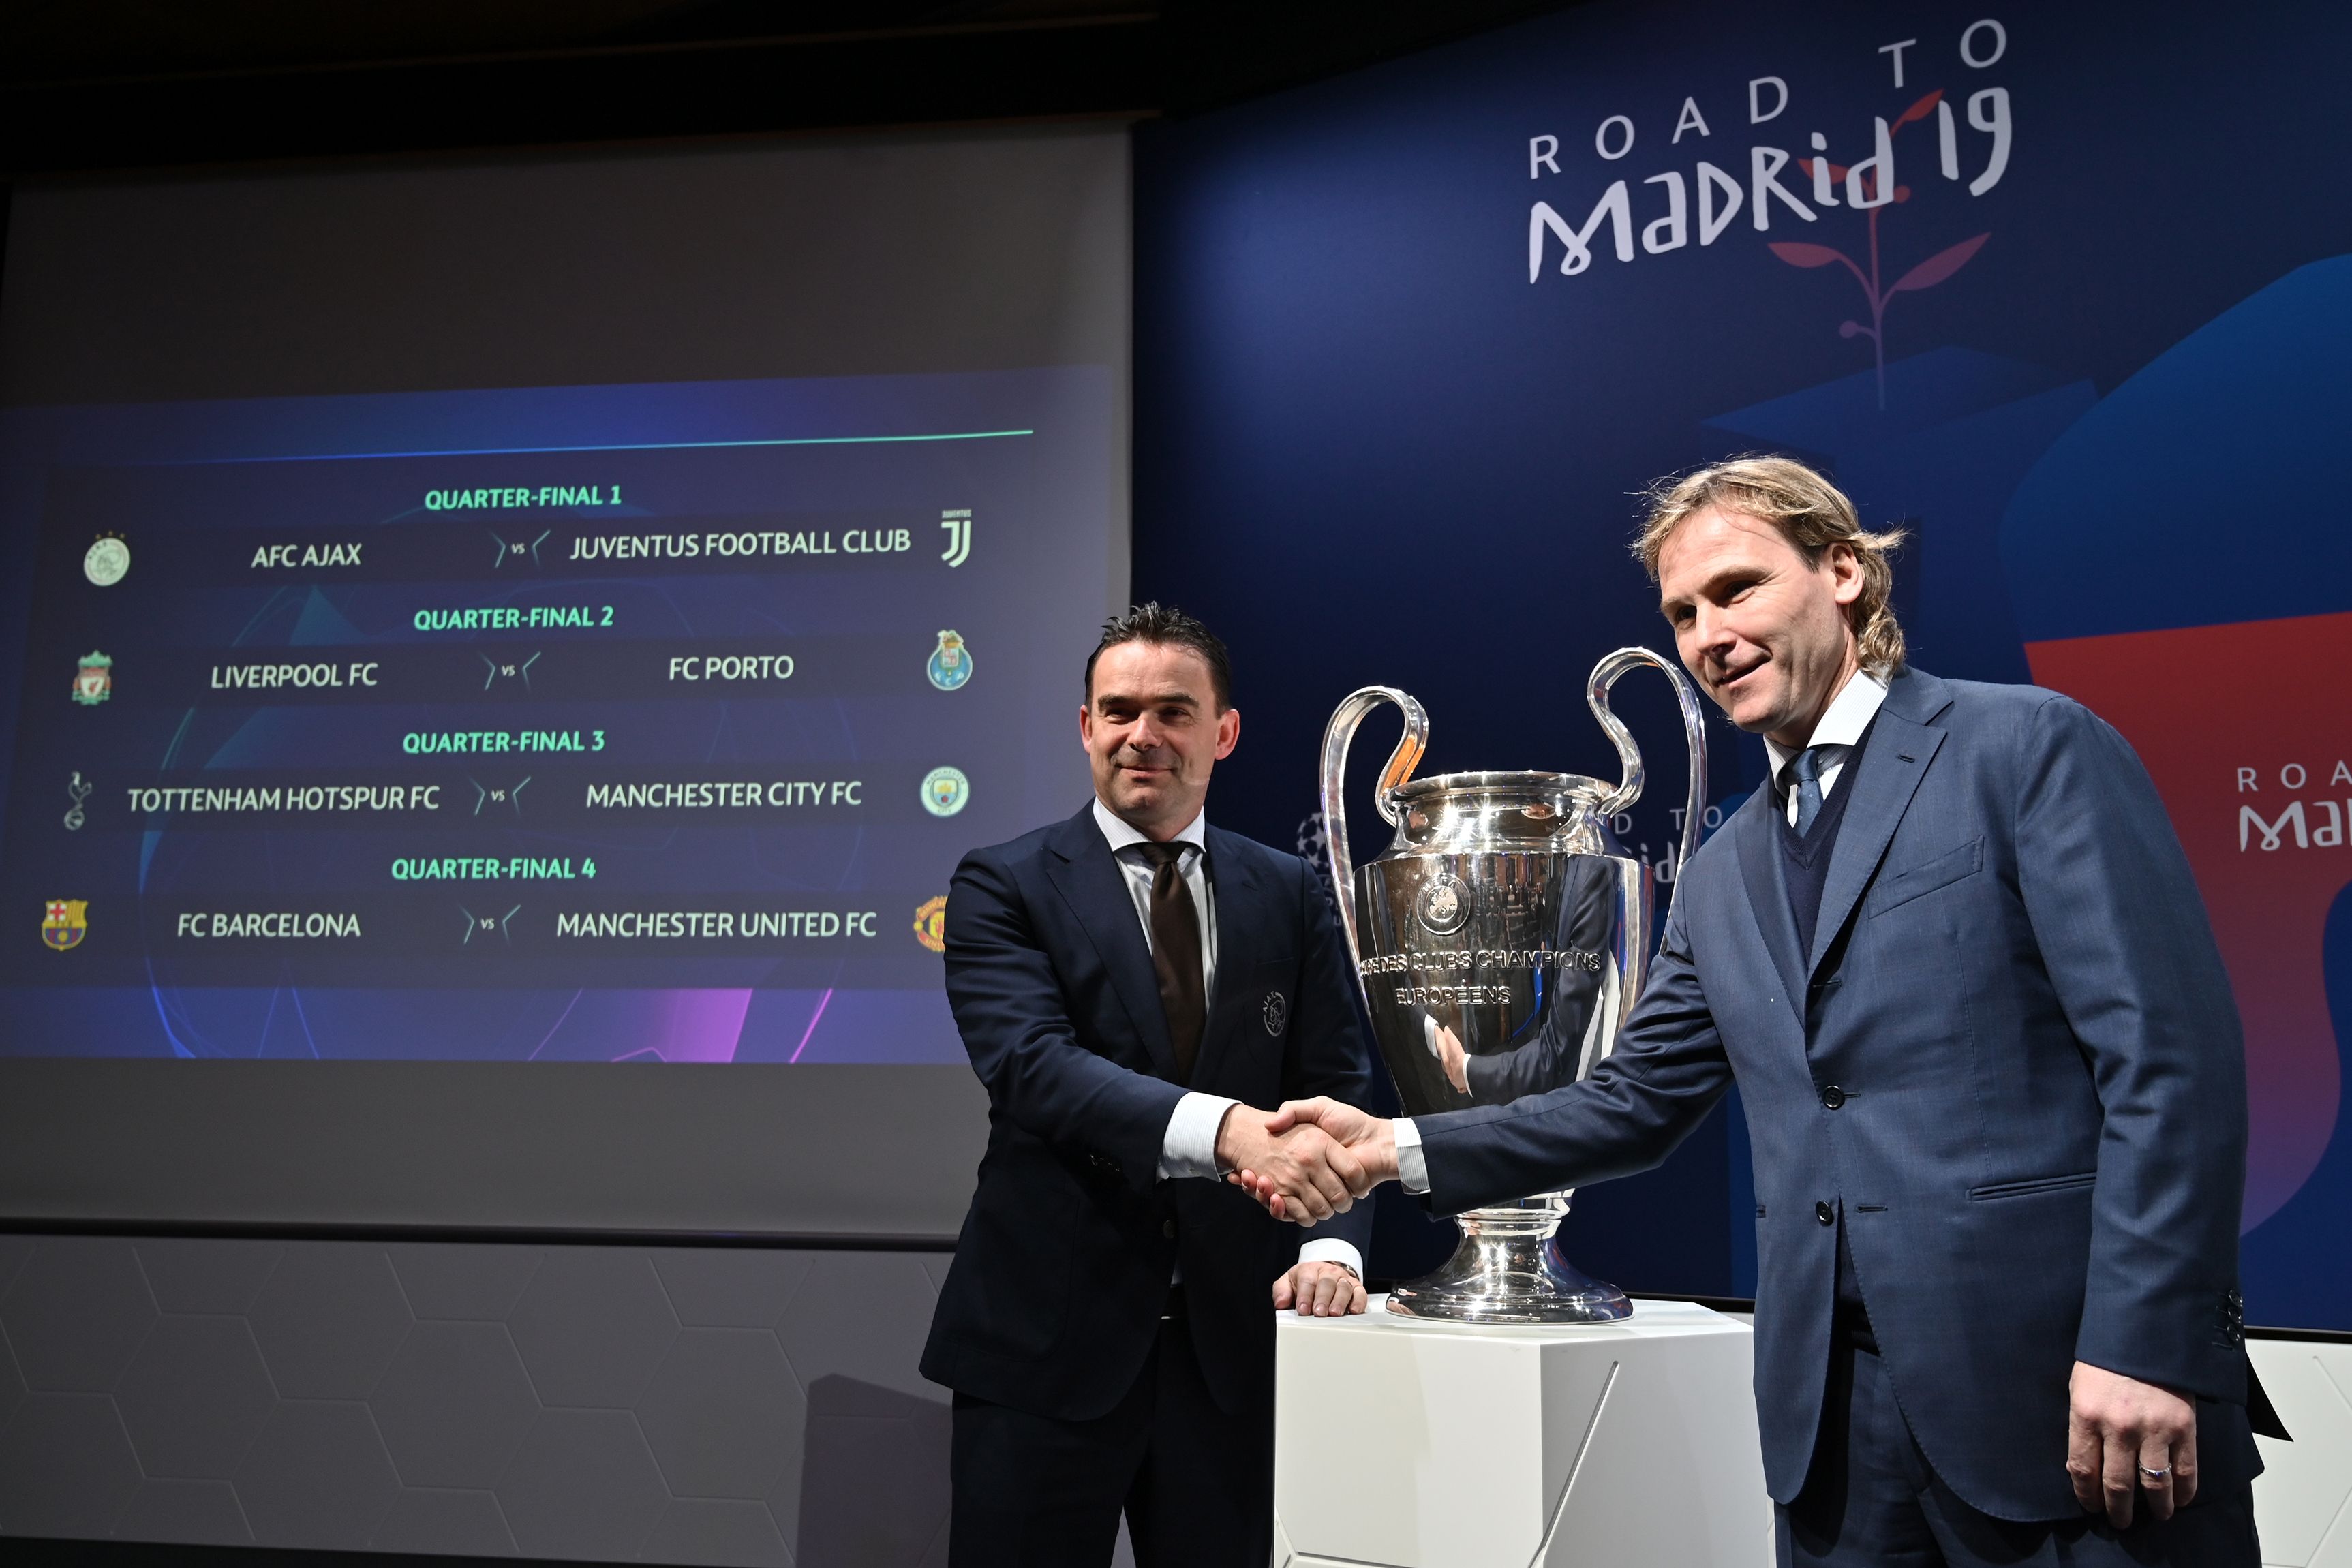 Juventus football club ambassador Pavel Nedved (R) shakes hands with Ajax director of football Marc Overmars next to results of the draw for the Champions league quarter-final and the competition's trophy, on March 15, 2019 in Nyon. (Photo by Fabrice COFFRINI / AFP)        (Photo credit should read FABRICE COFFRINI/AFP/Getty Images)